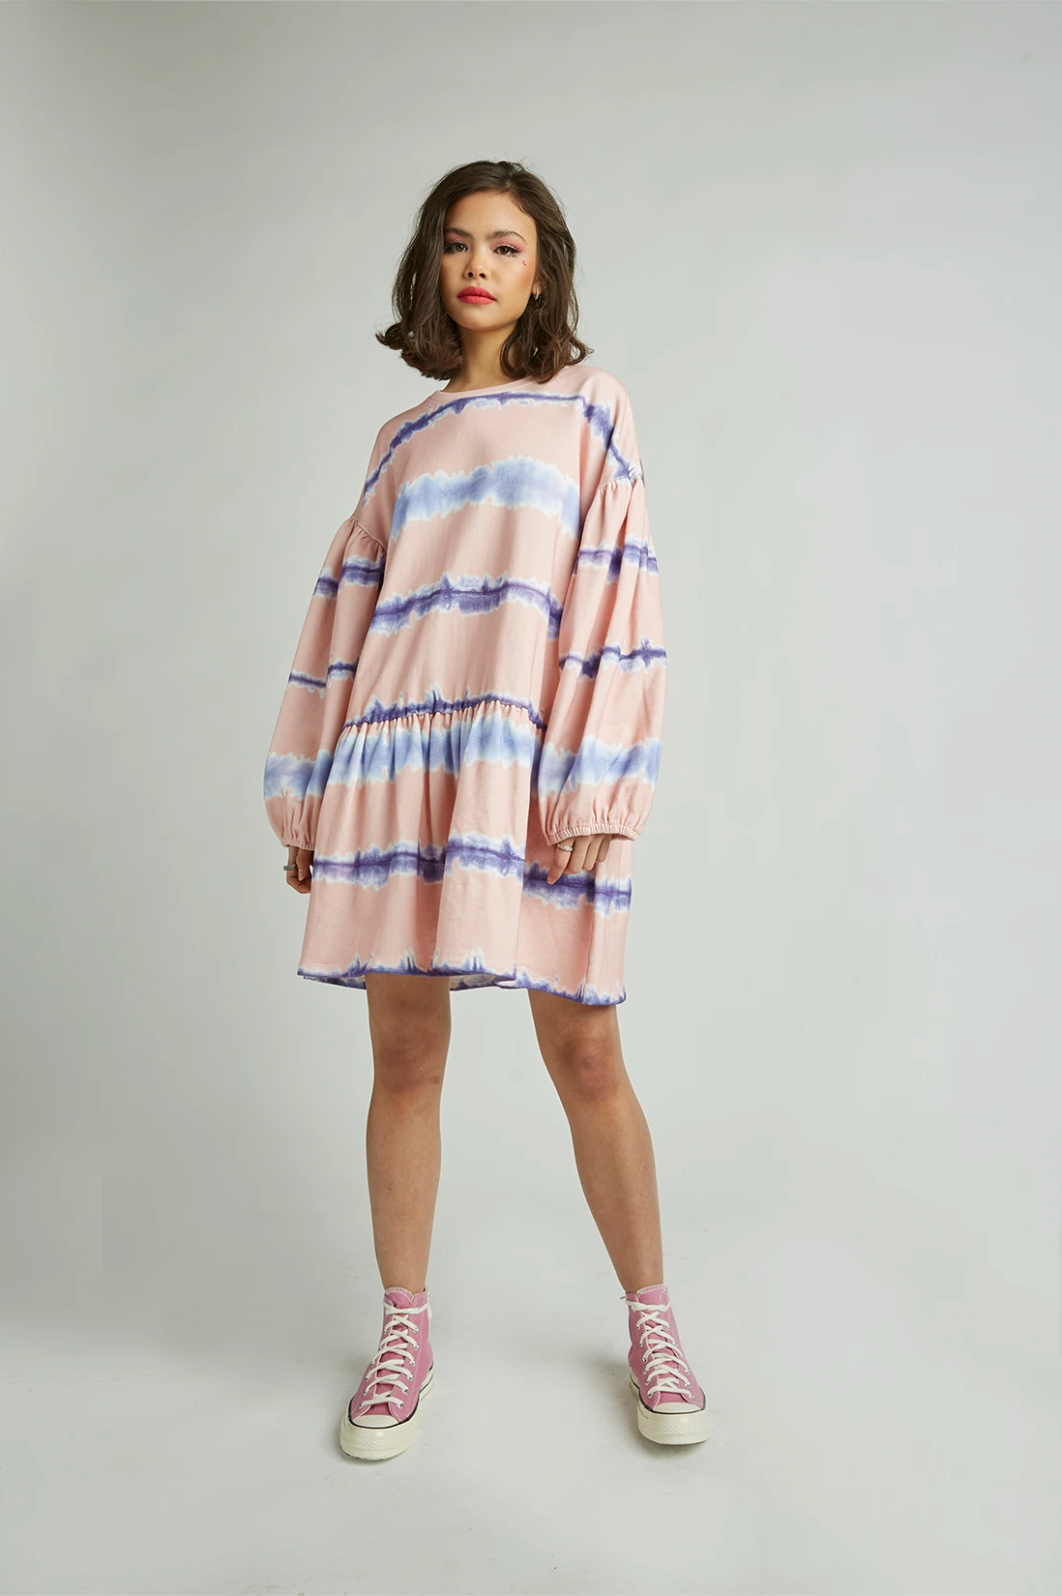 TIE DYE SWEATSHIRT DRESS - EXCLUSIVE Dresses from NGO - Just €33! SHOP NOW AT IAMINHATELOVE BOTH IN STORE FOR CYPRUS AND ONLINE WORLDWIDE @ IAMINHATELOVE.COM